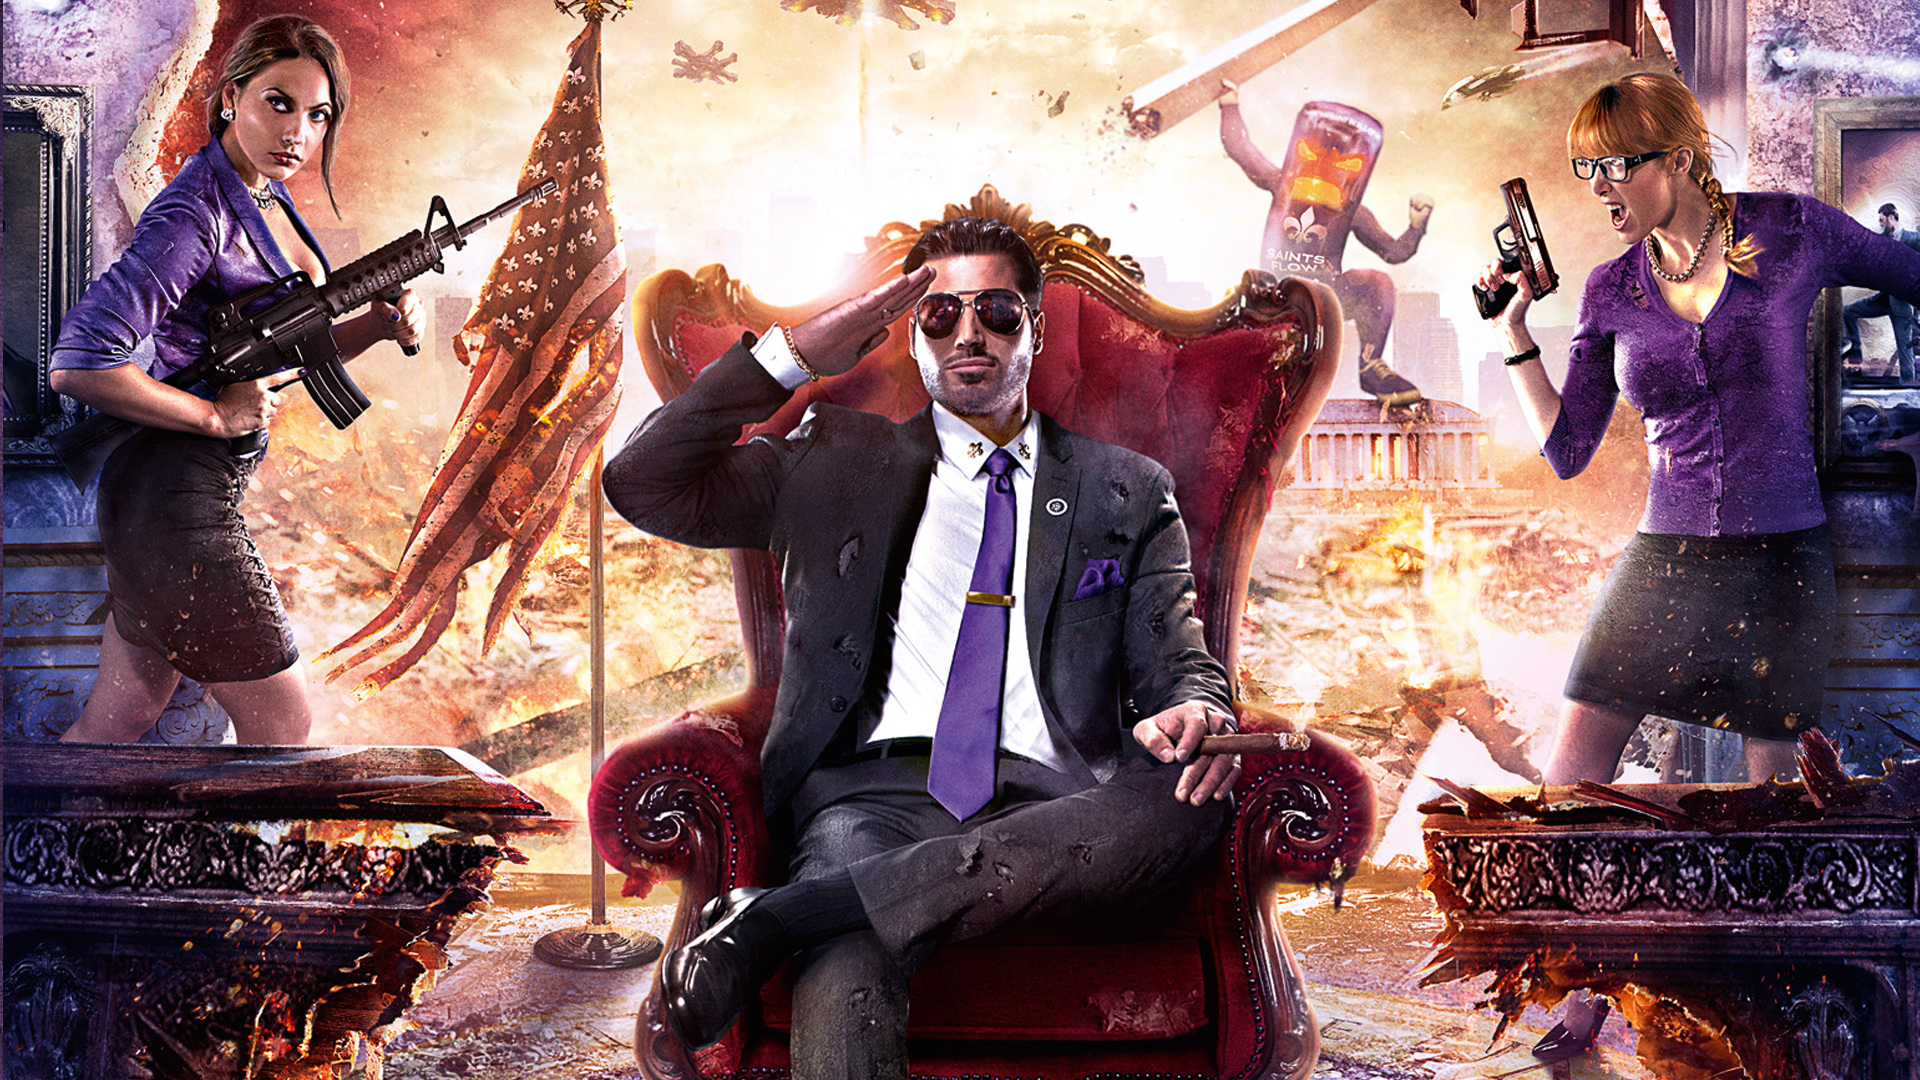 Buy Saints Row: Gat Out of Hell from the Humble Store